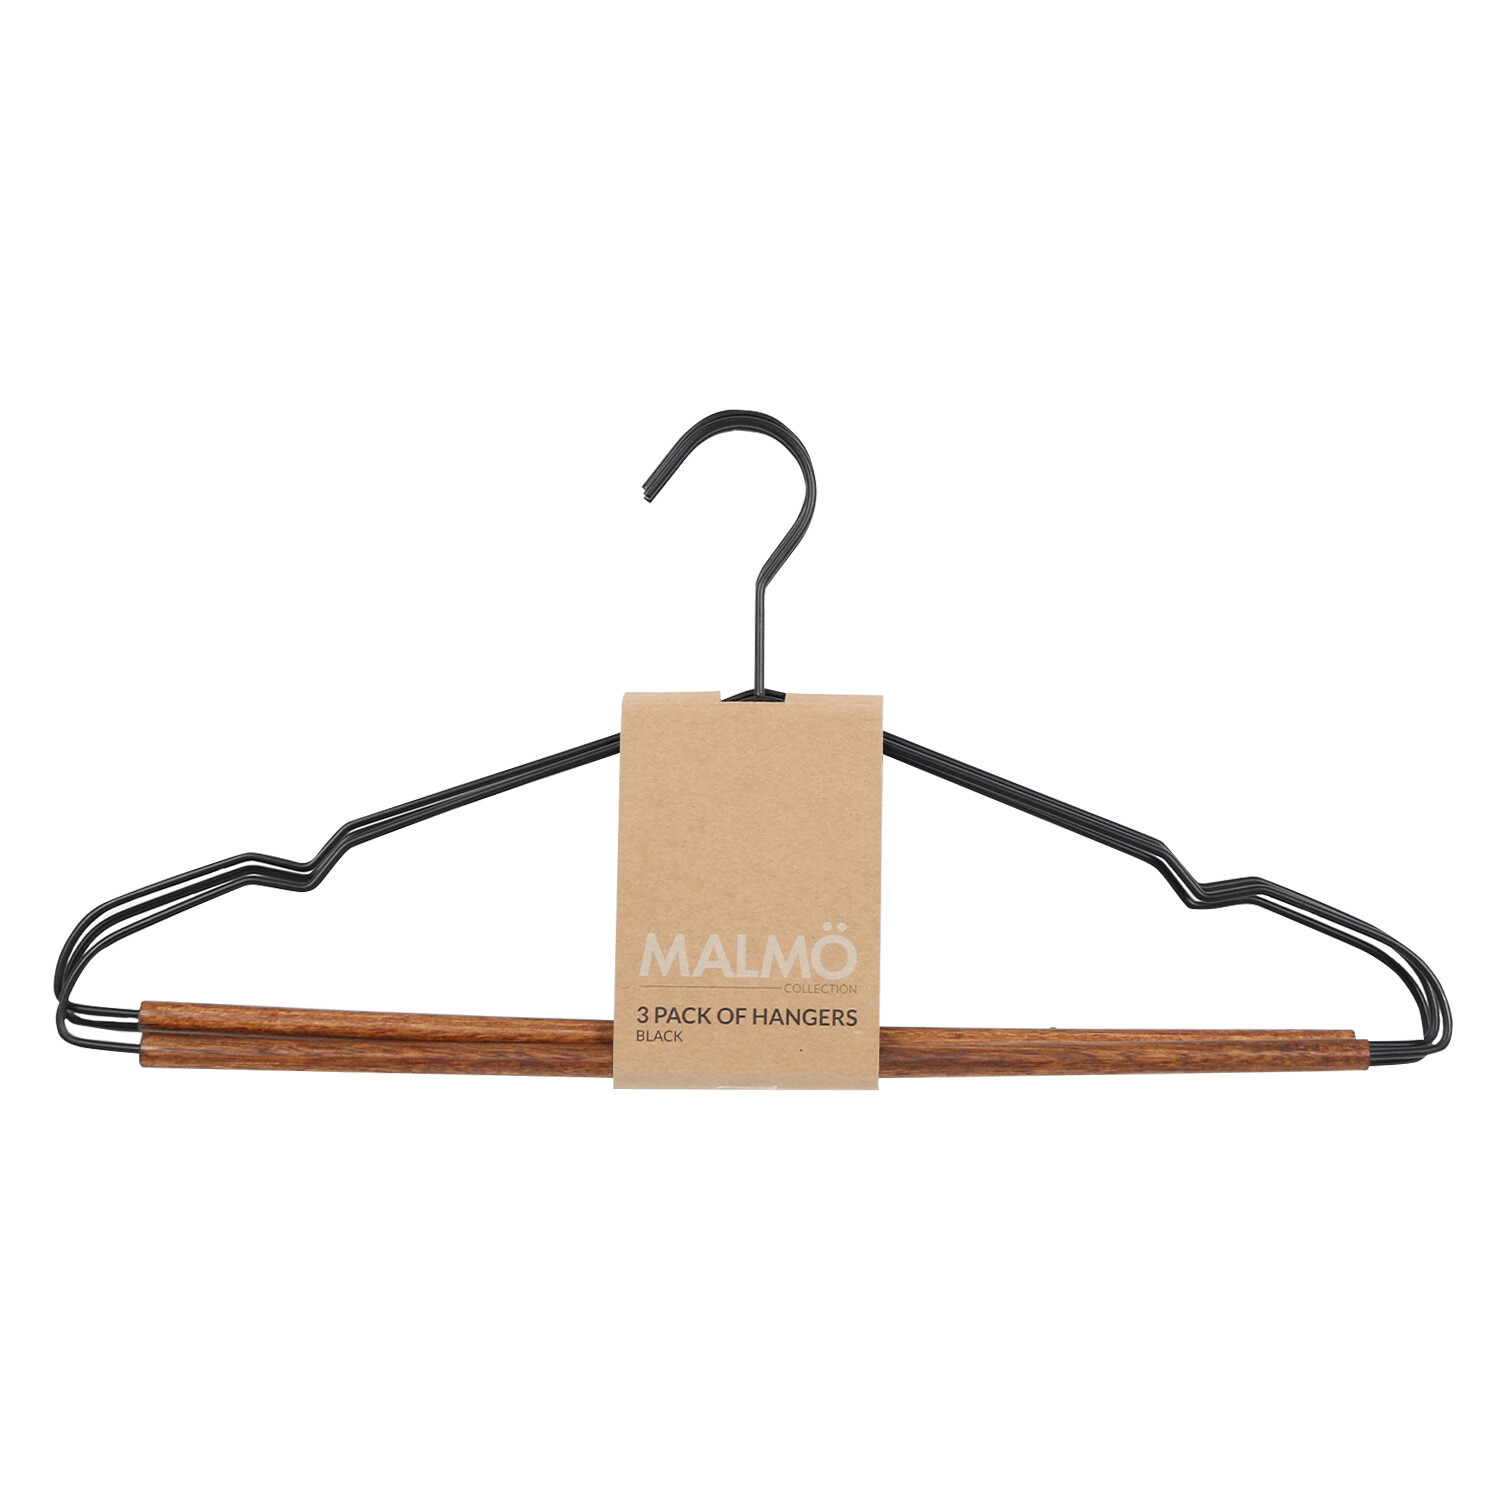 Malmo Pack of 3 Hangers Black Image